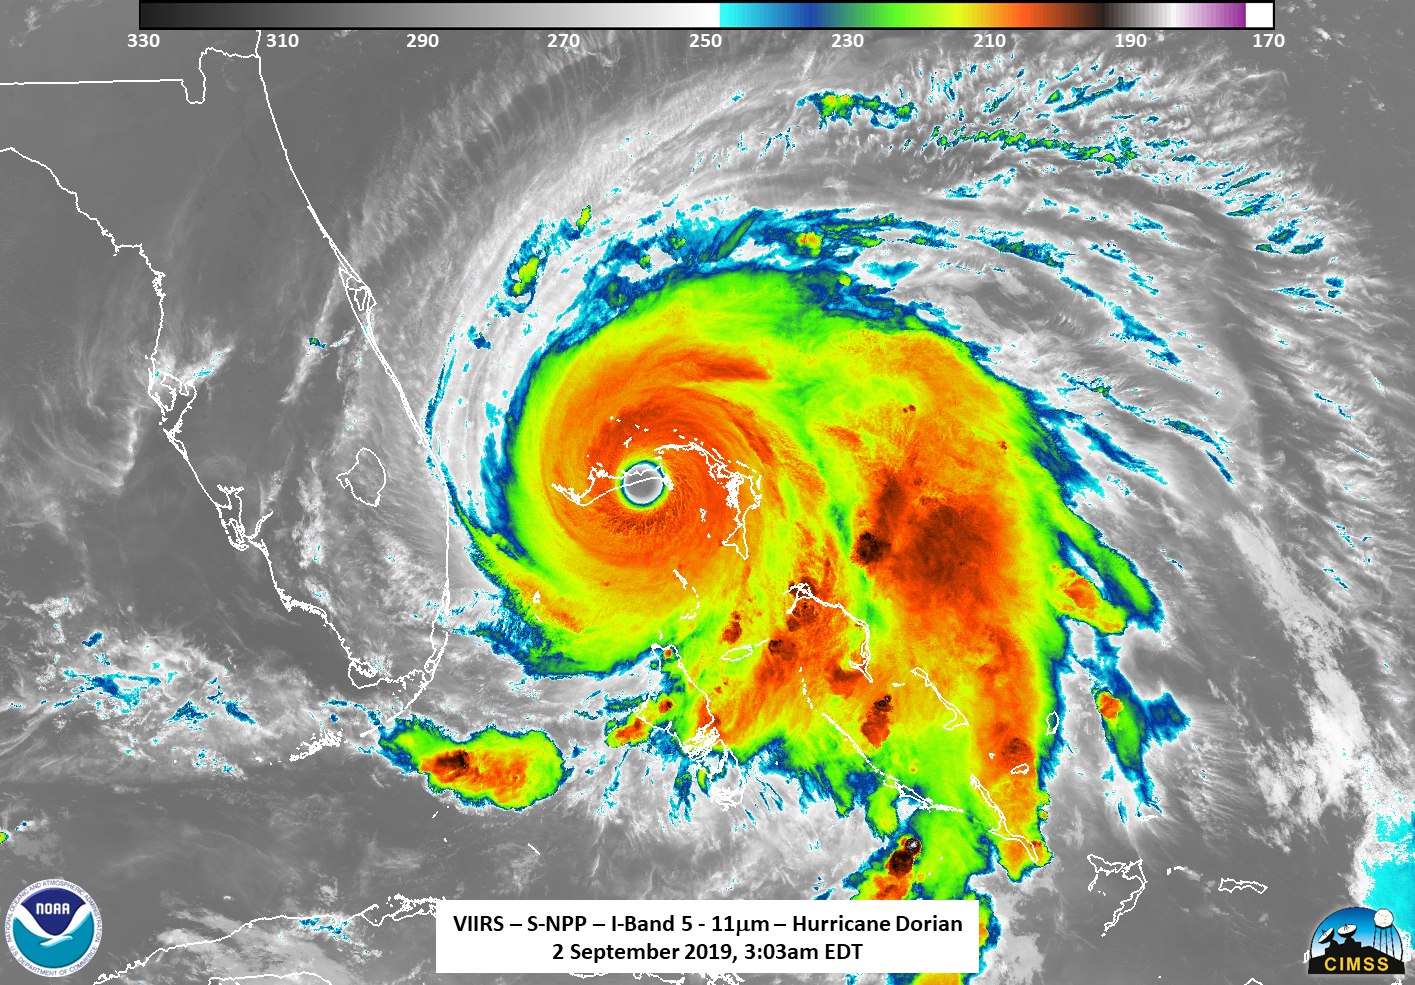 A Guide to Understanding Satellite Images of Hurricanes